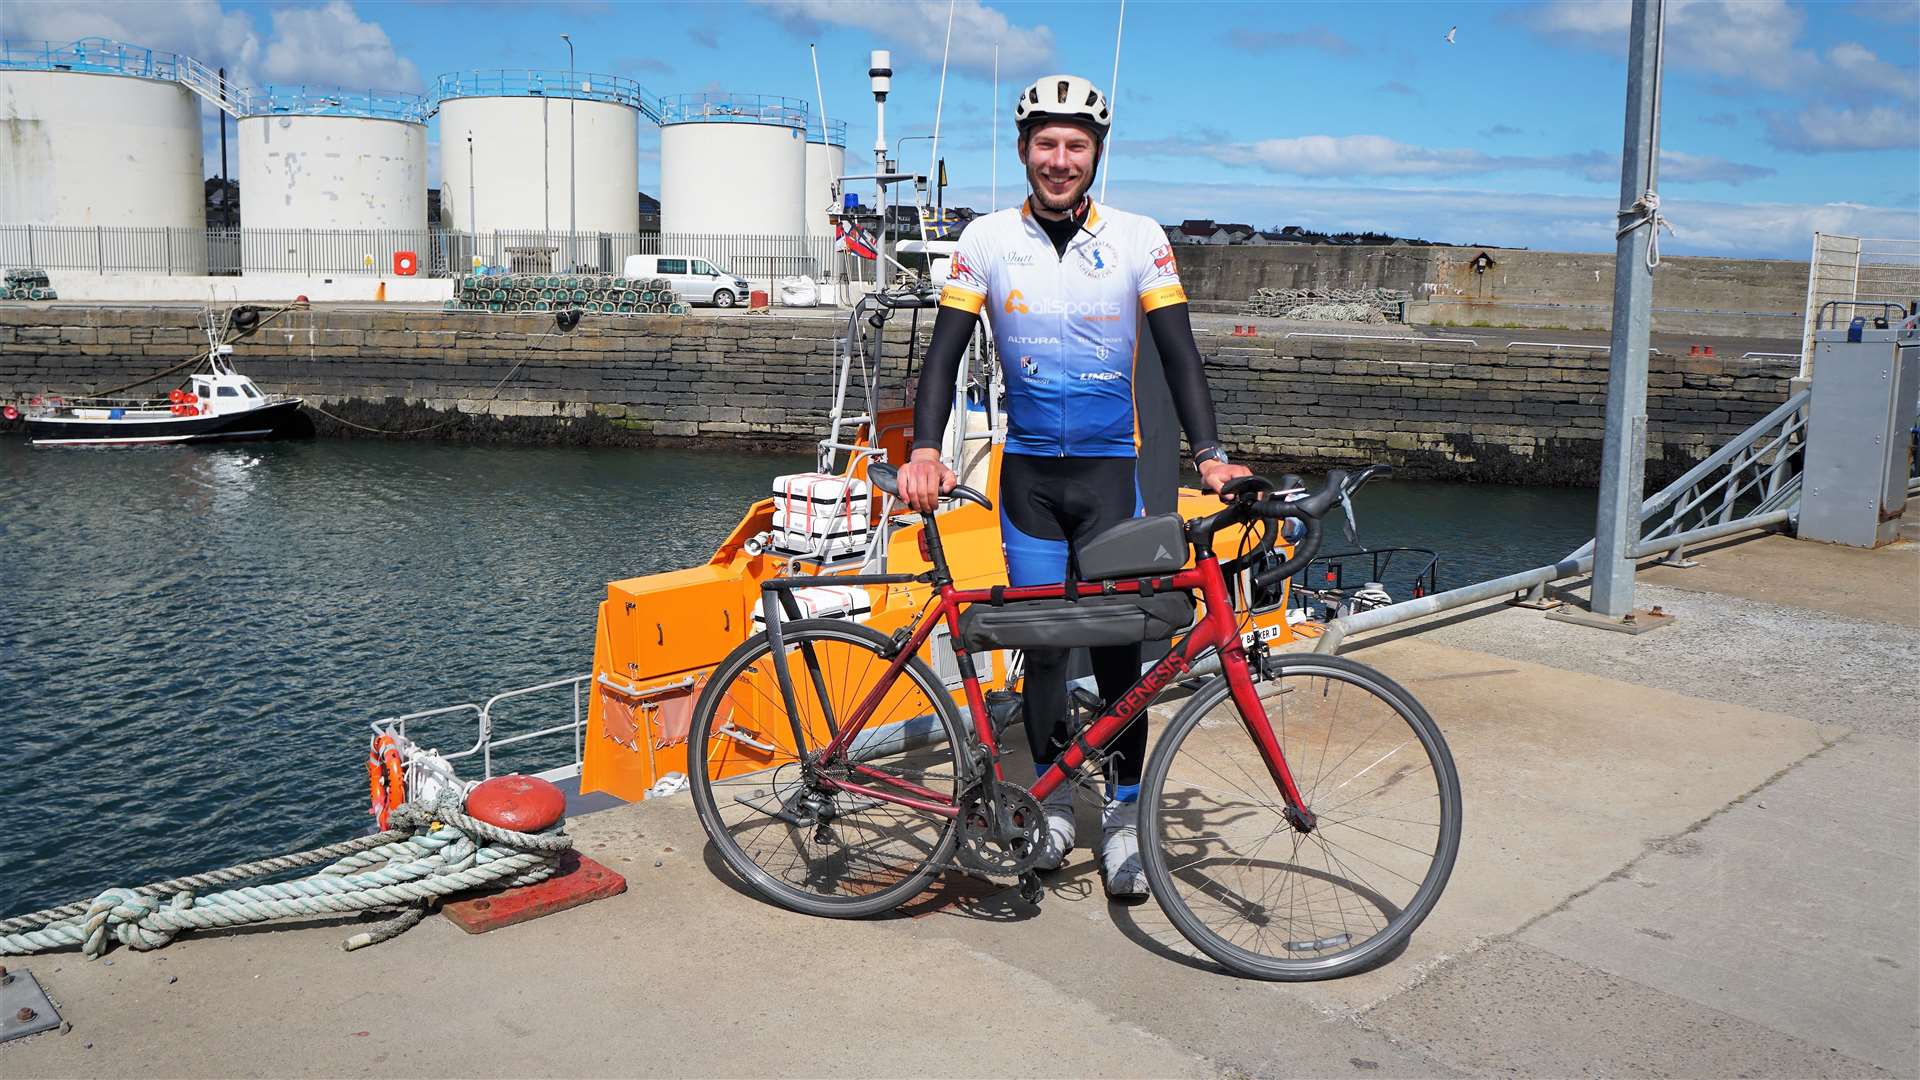 Harry Lidgley beside the Wick lifeboat on Saturday morning. Harry has now visited 86 lifeboat stations on the fundraising journey, cycling 3775km. Pictures: DGS